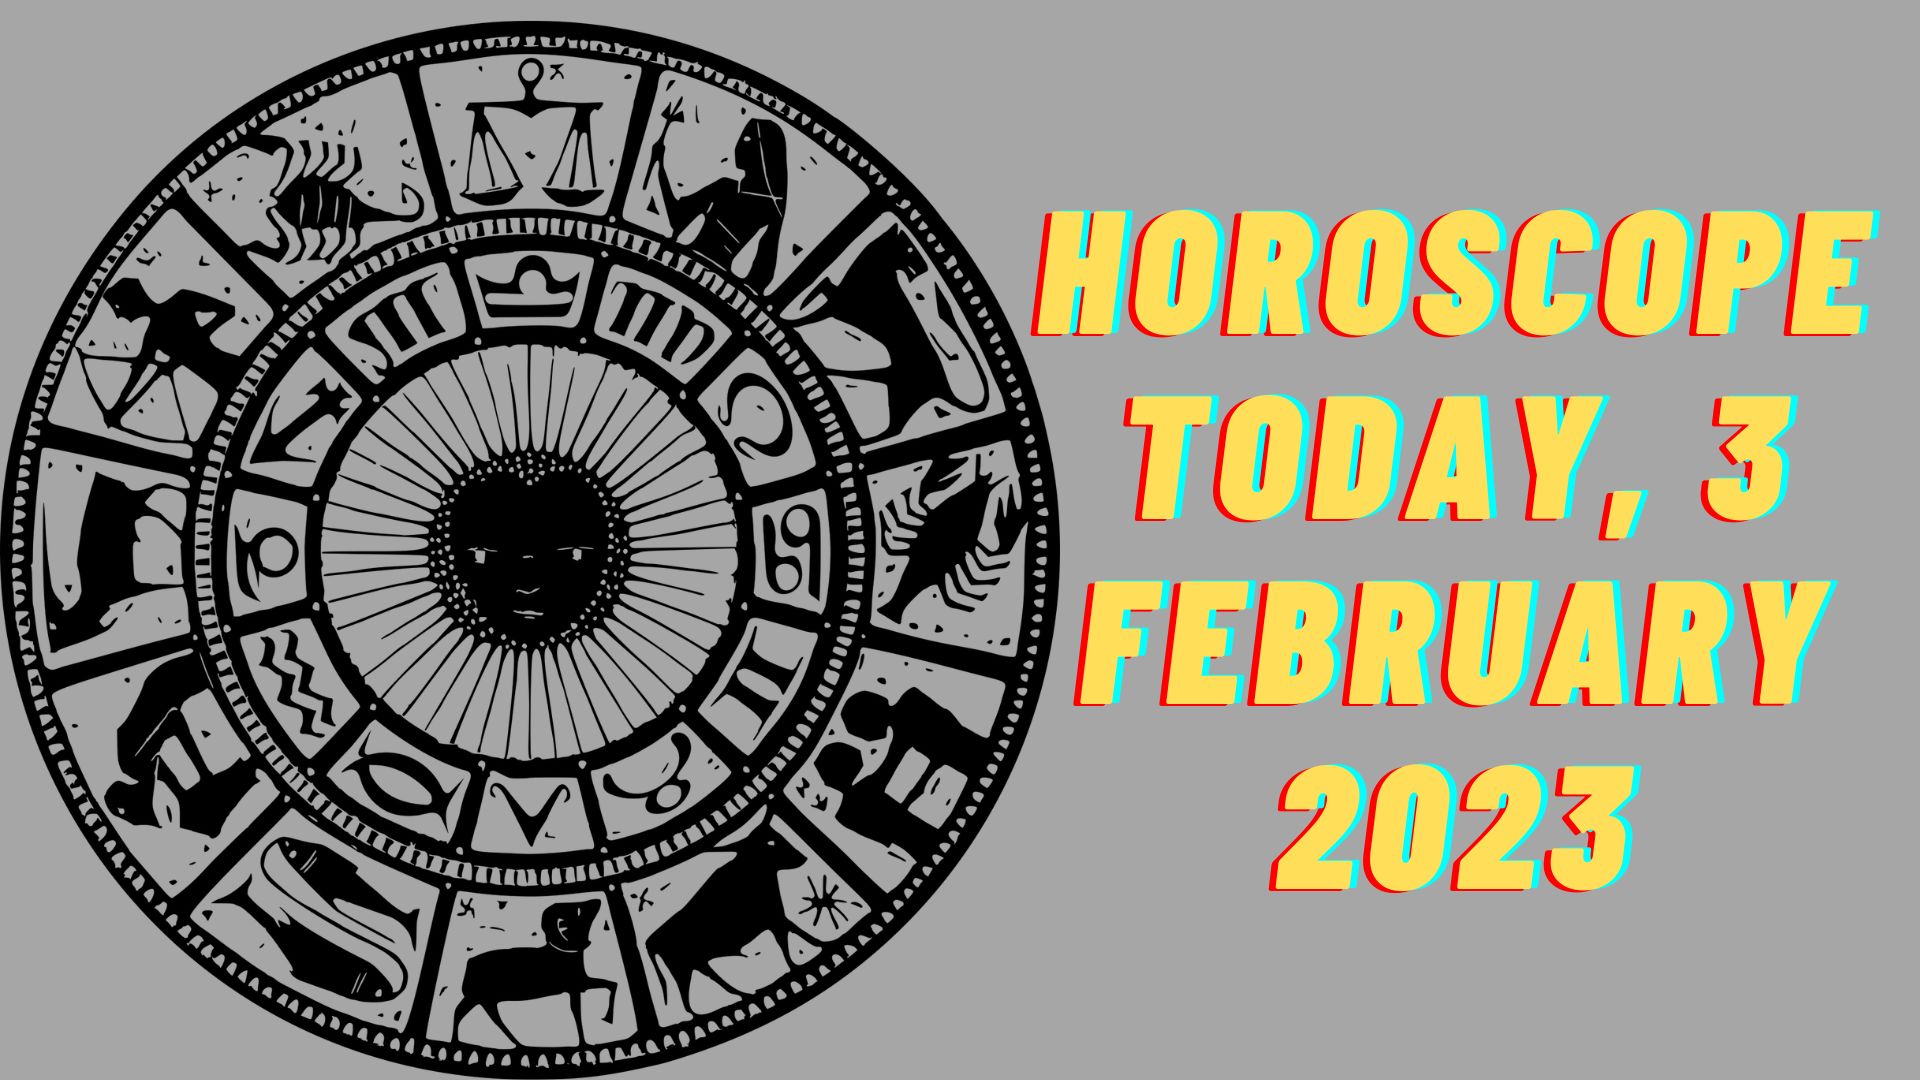 Horoscope Today, 3 February 2023 - Check Here Astrological Prediction For All Sun Signs